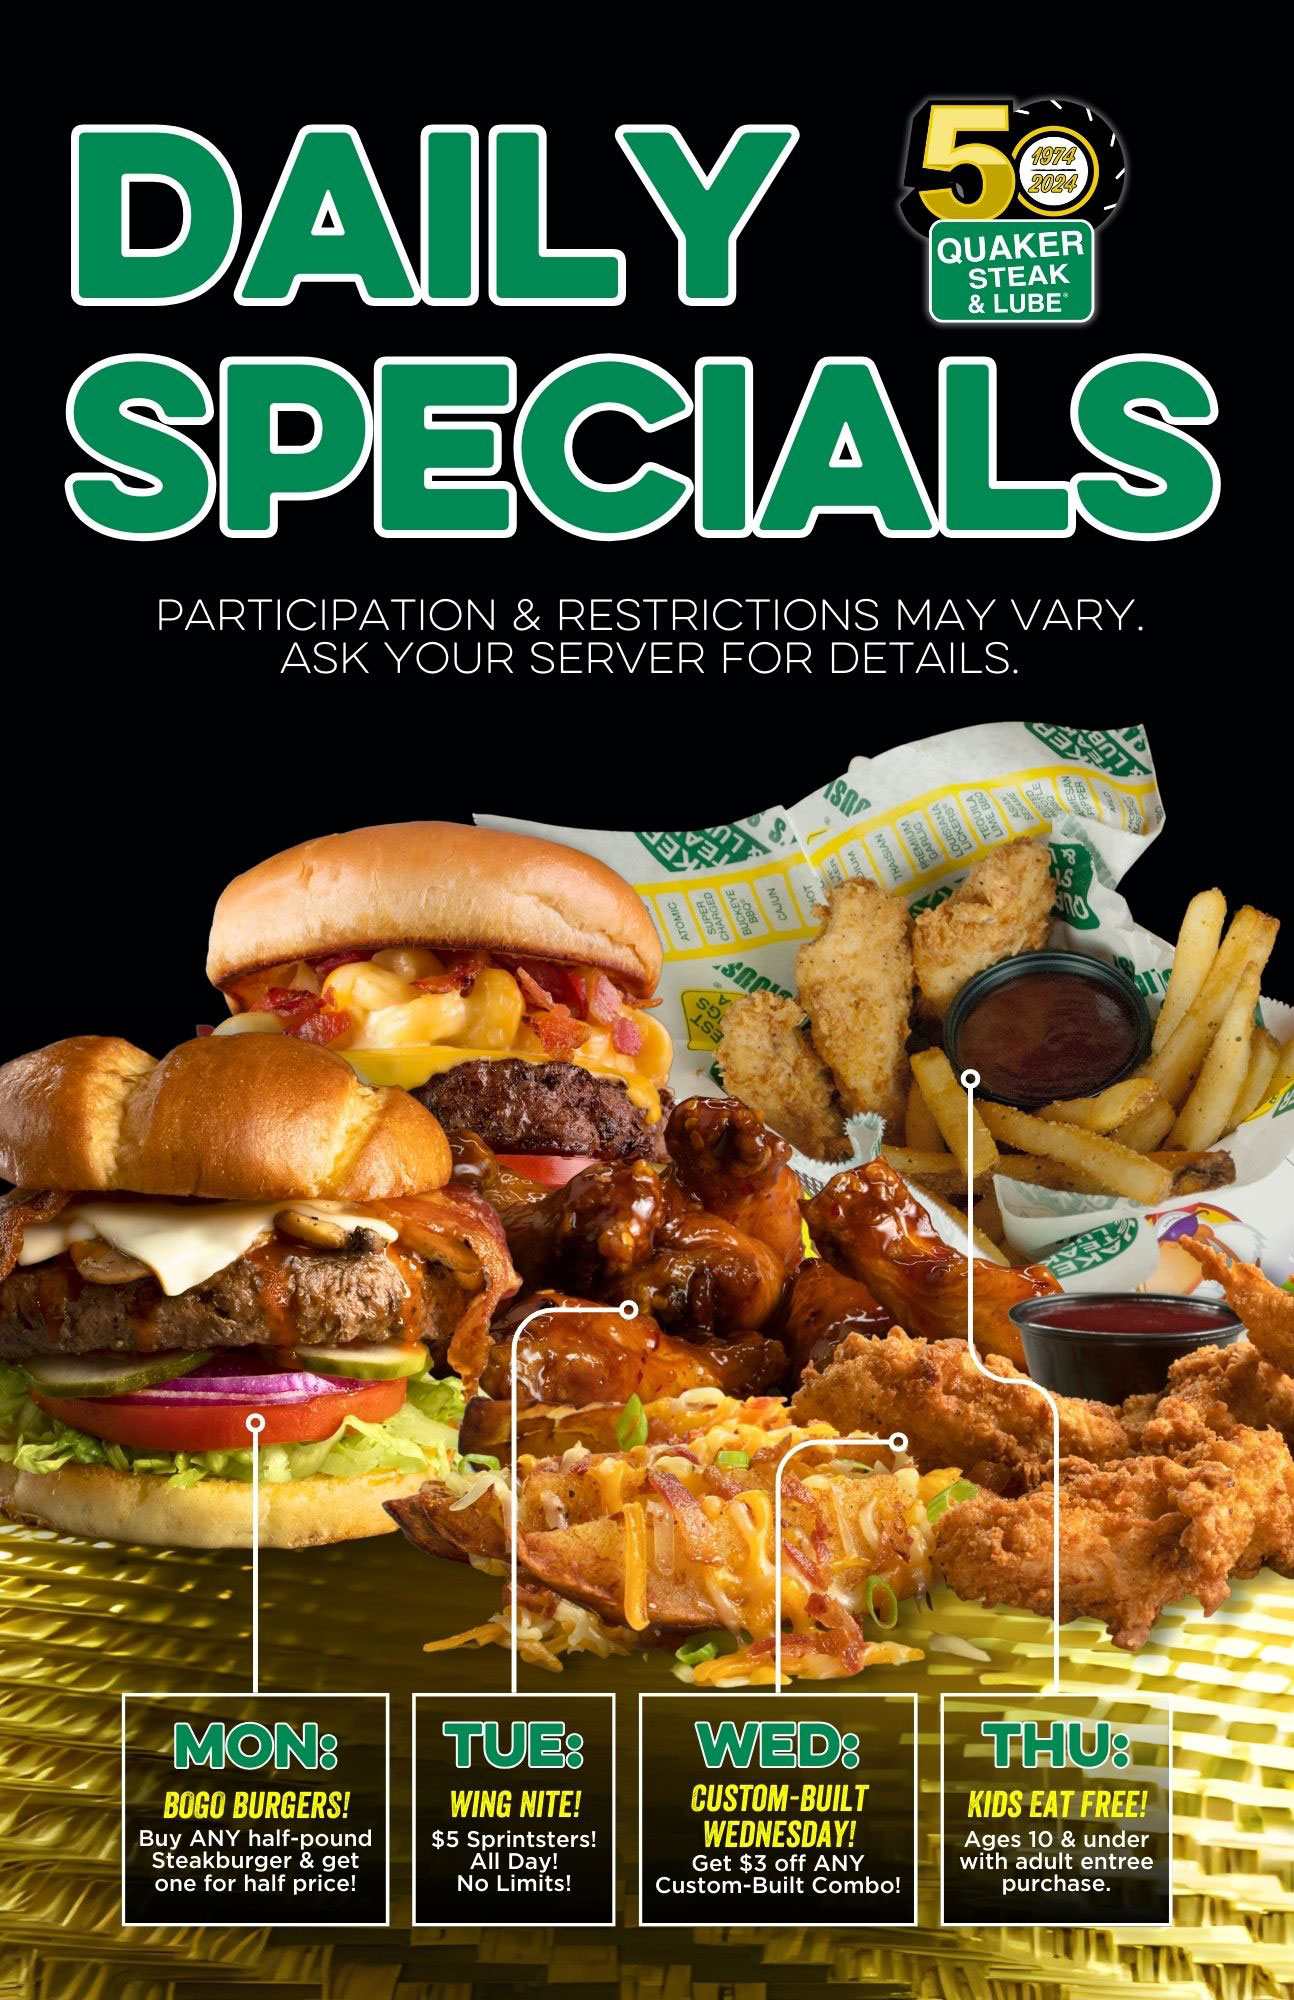 Daily Specials At the Quaker Steak & Lube Wheeling Restaurant